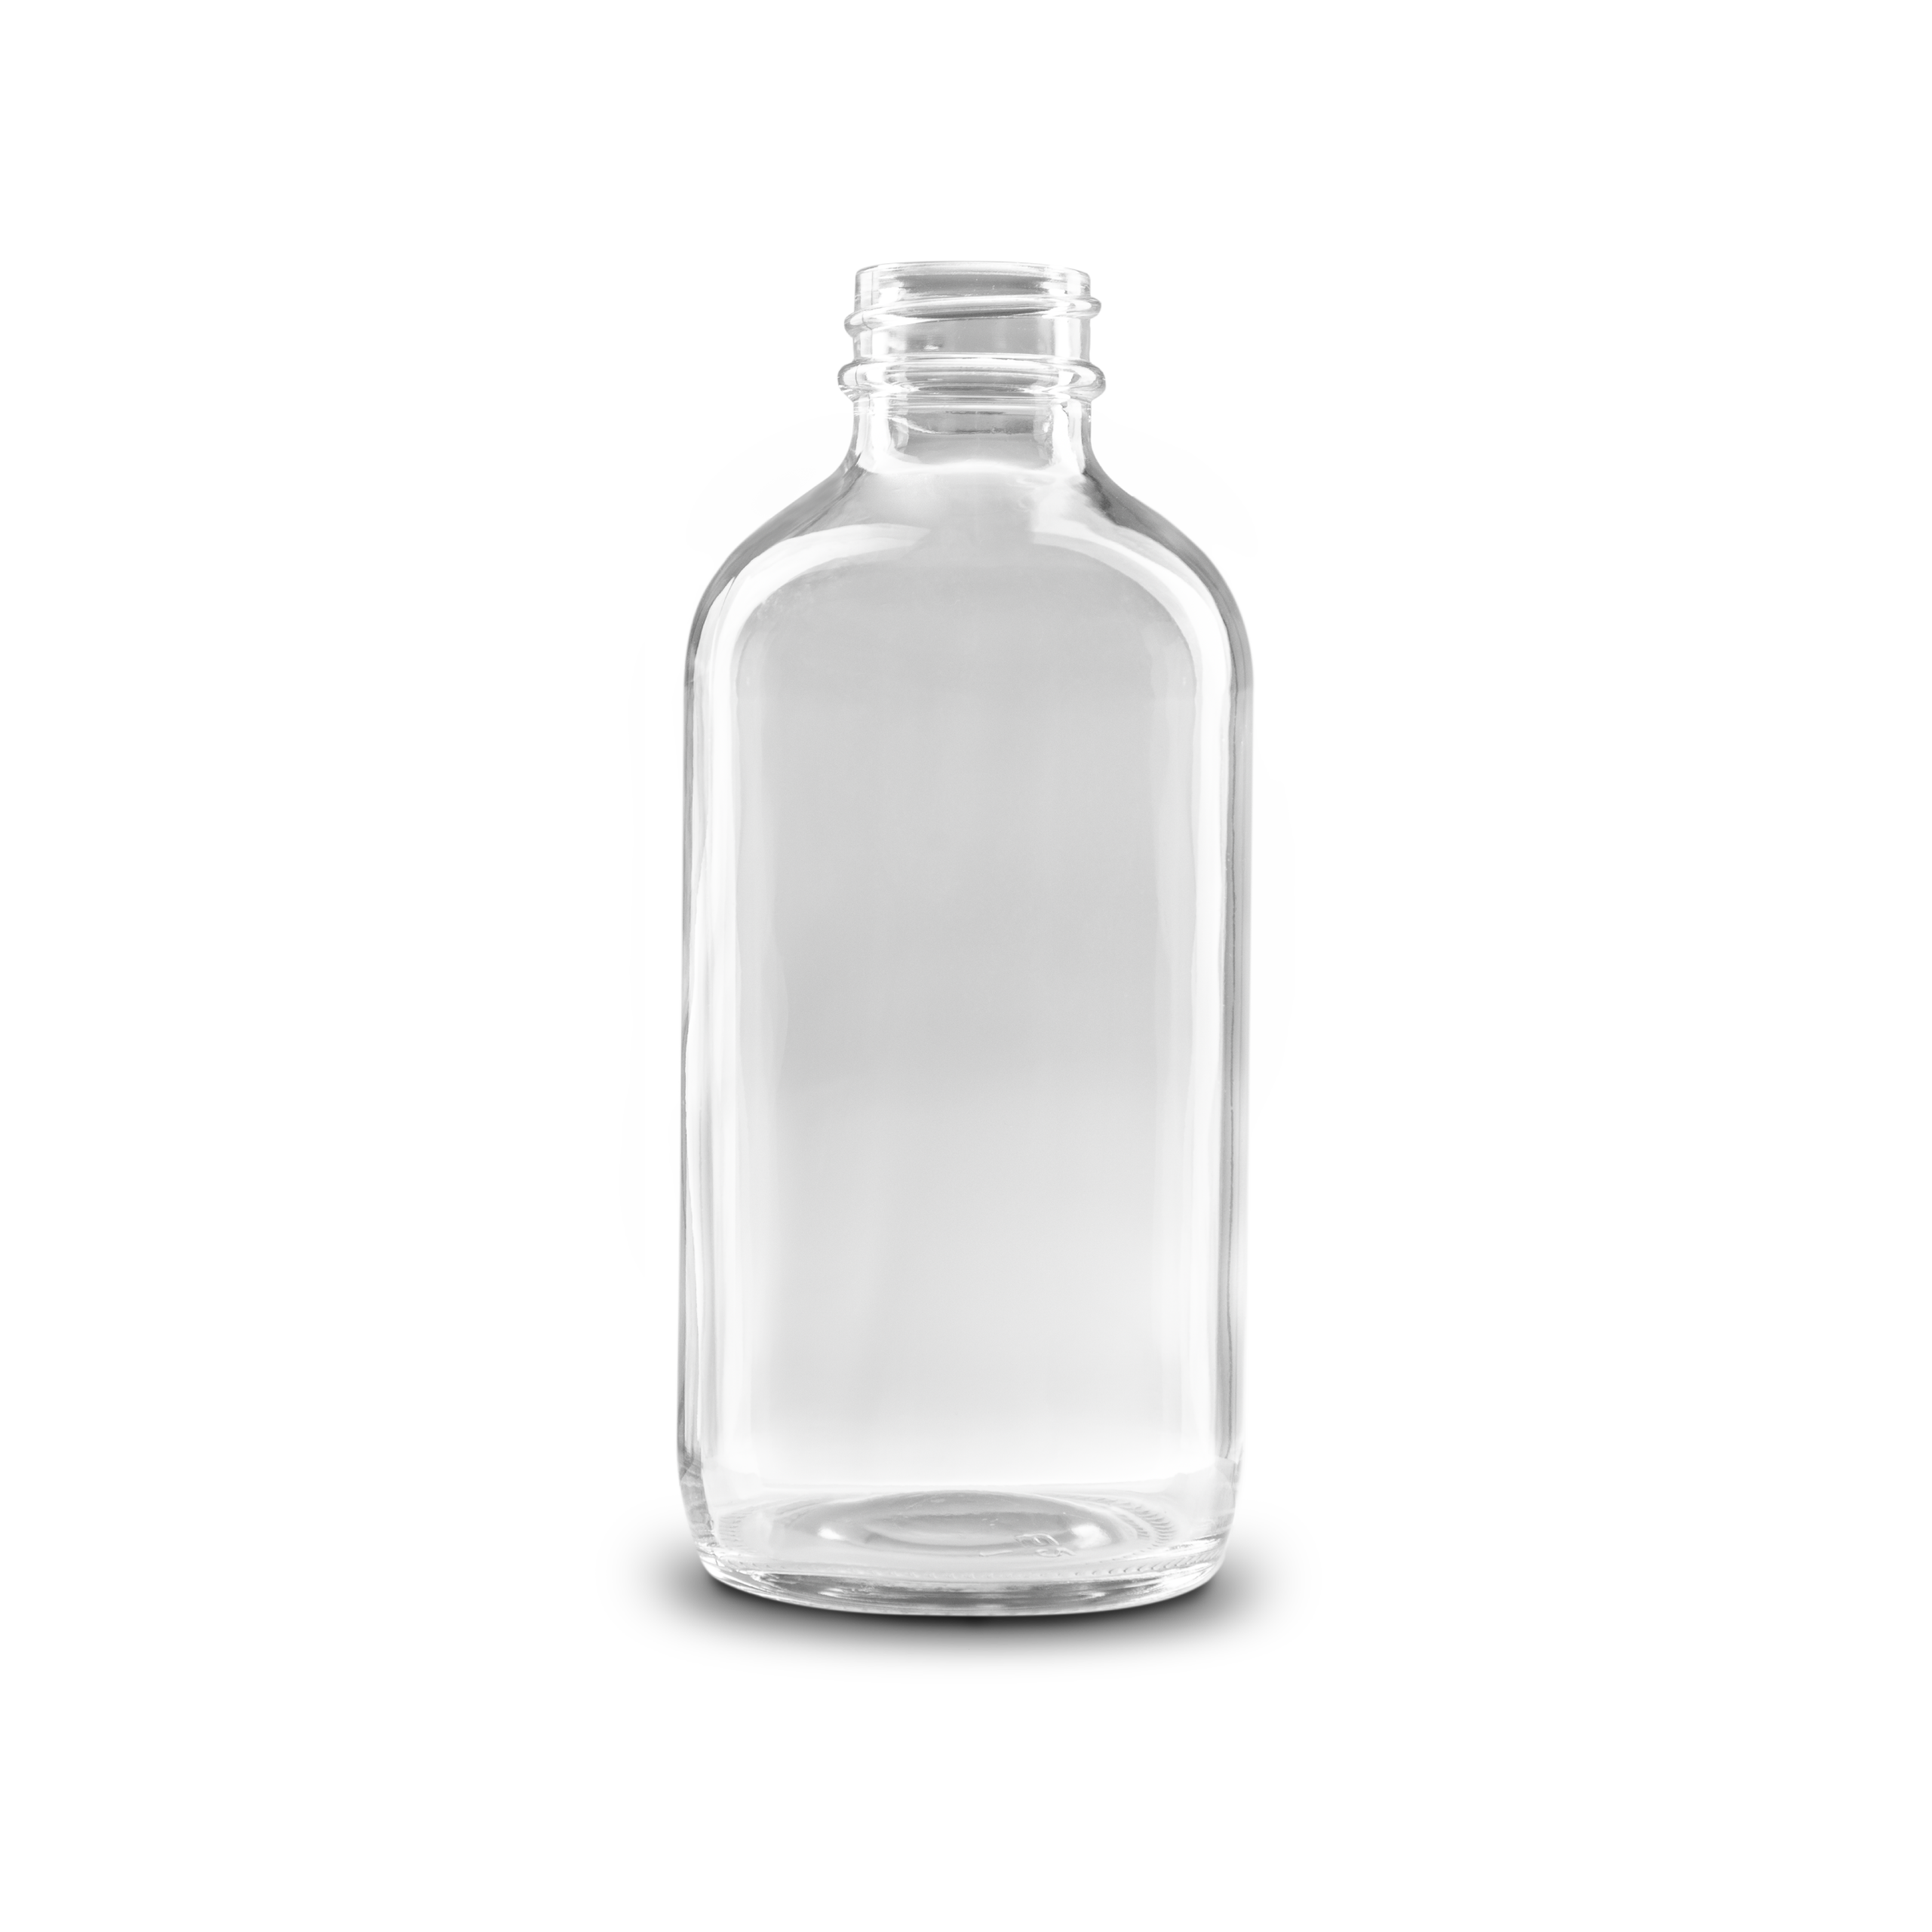 8 oz clear boston round glass bottles are durable and offer a range of transparency options to see the liquid inside.